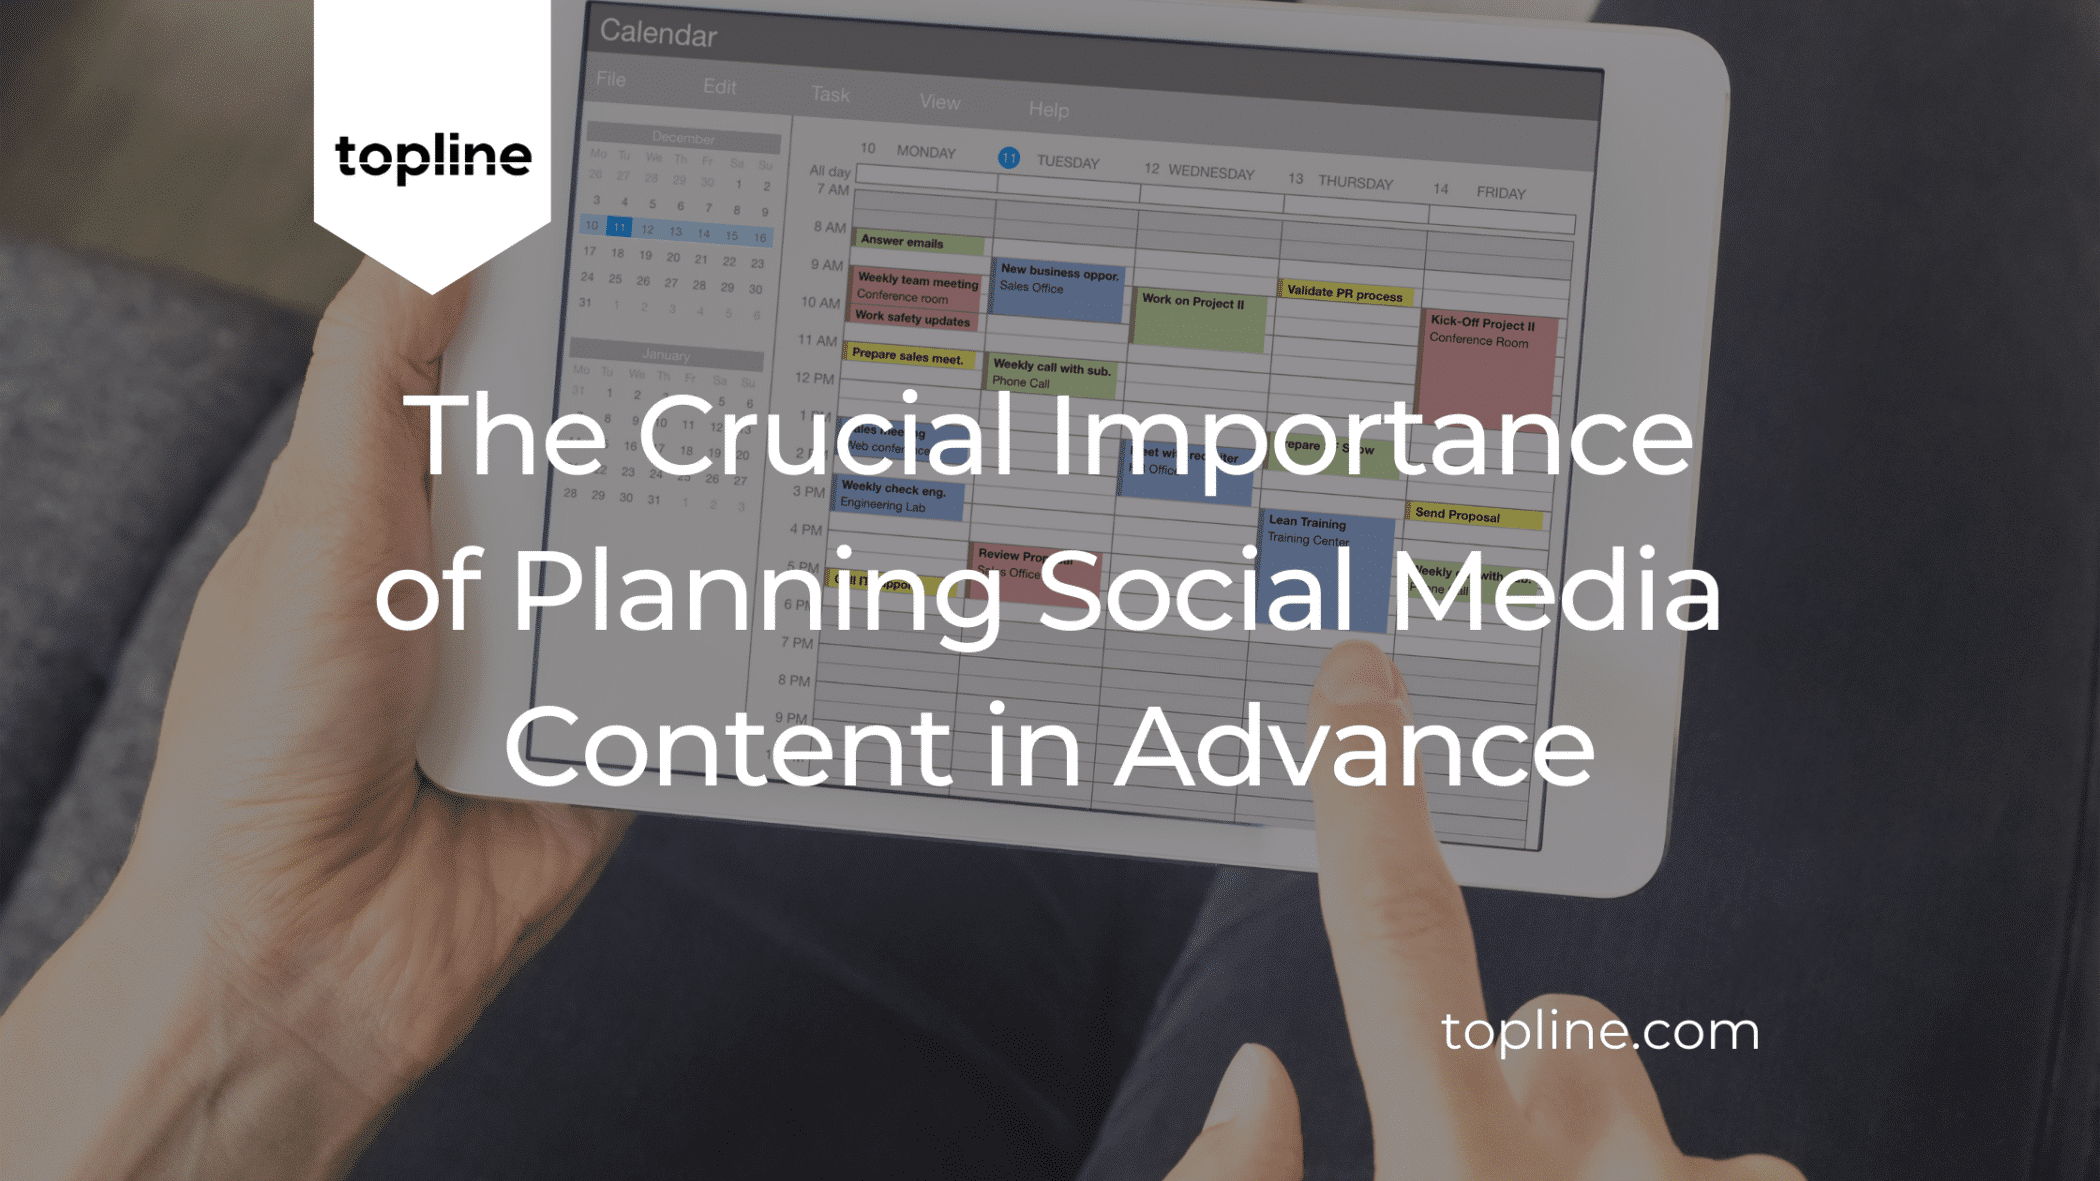 The Crucial Importance of Planning Social Media Content in Advance